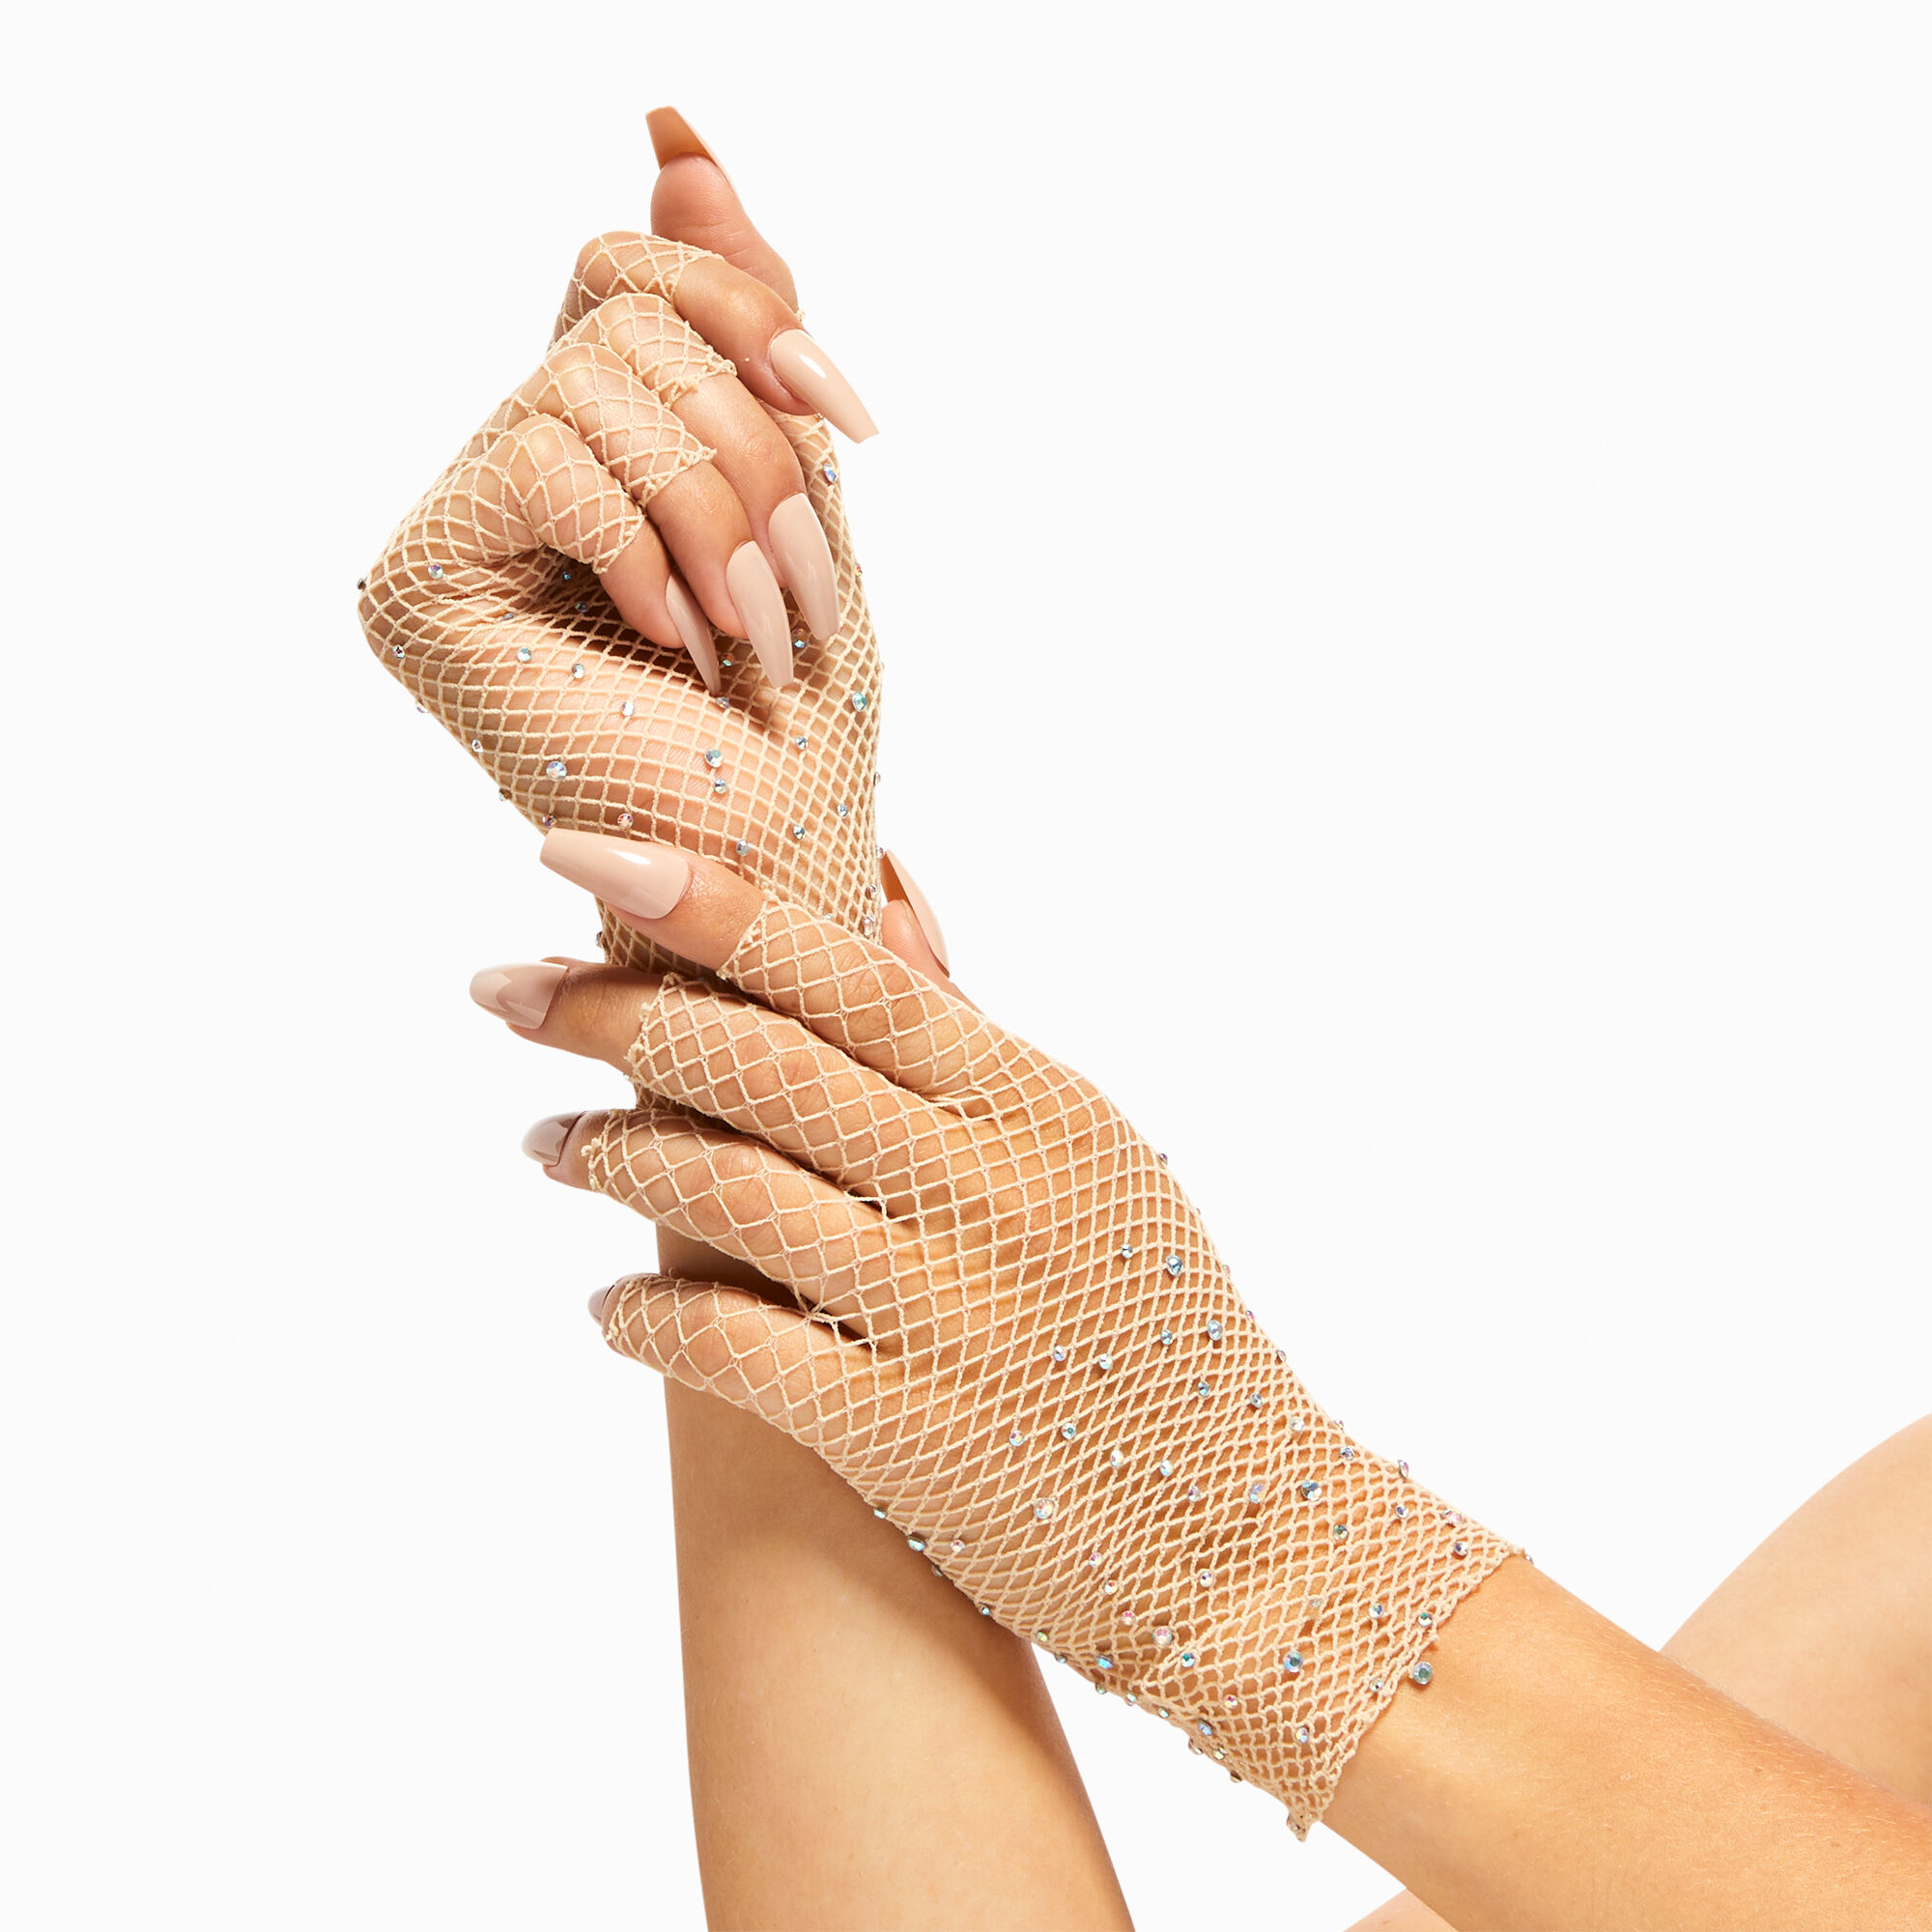 View Claires Rhinestone Fishnet Arm Warmers Nude information